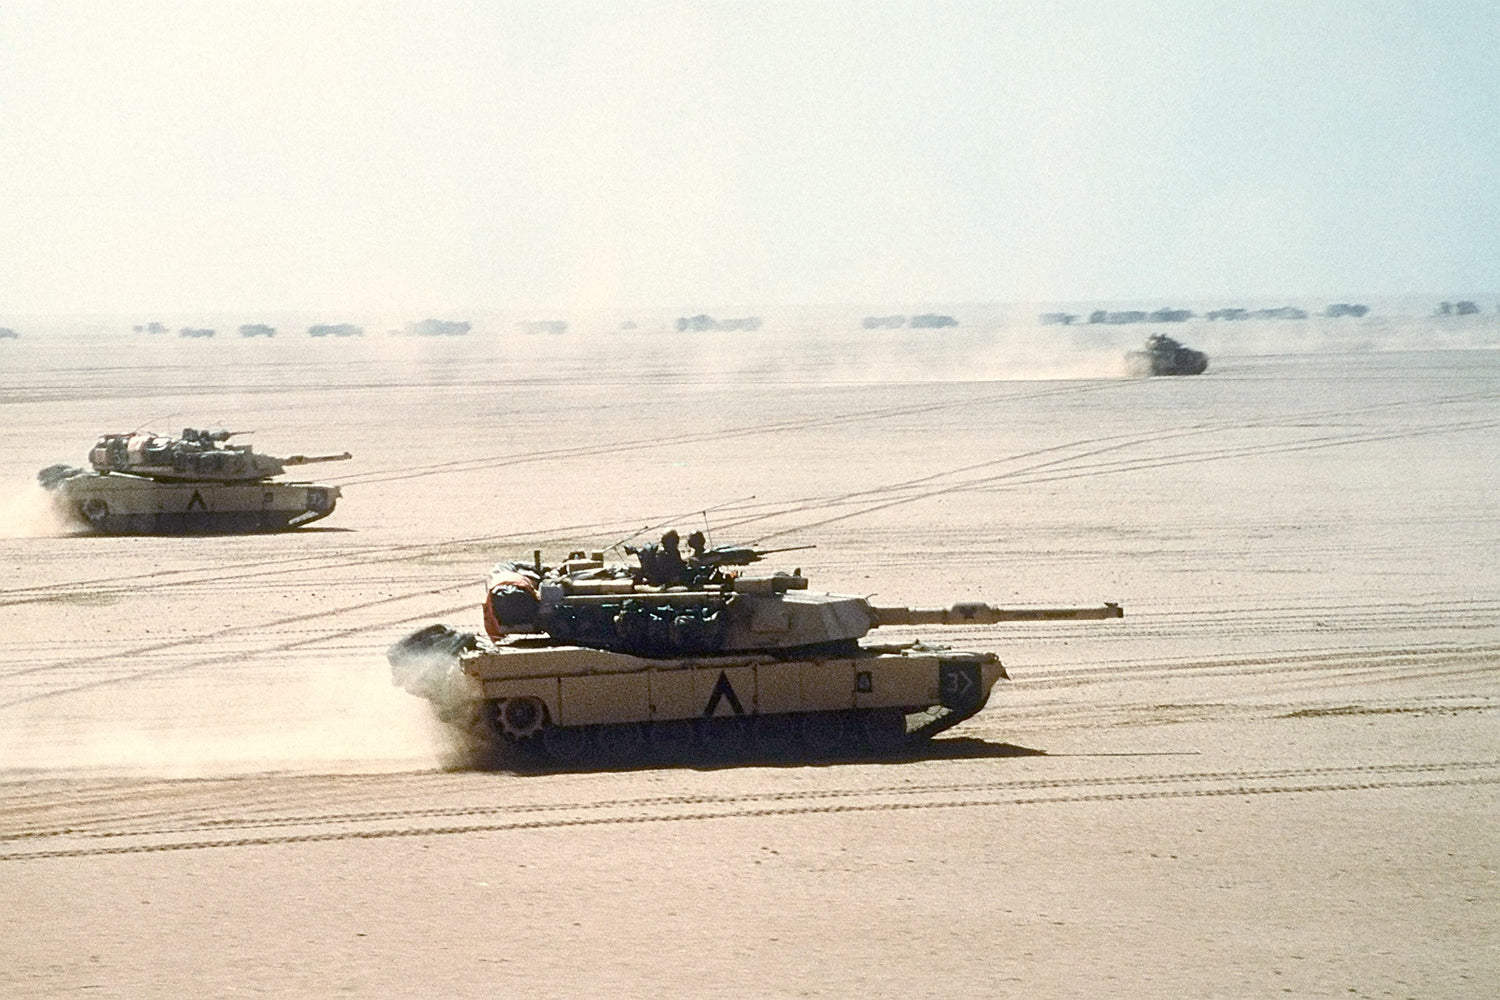 Abrams move out on a mission during the Gulf War. A Bradley IFV and logistics convoy can be seen in the background.